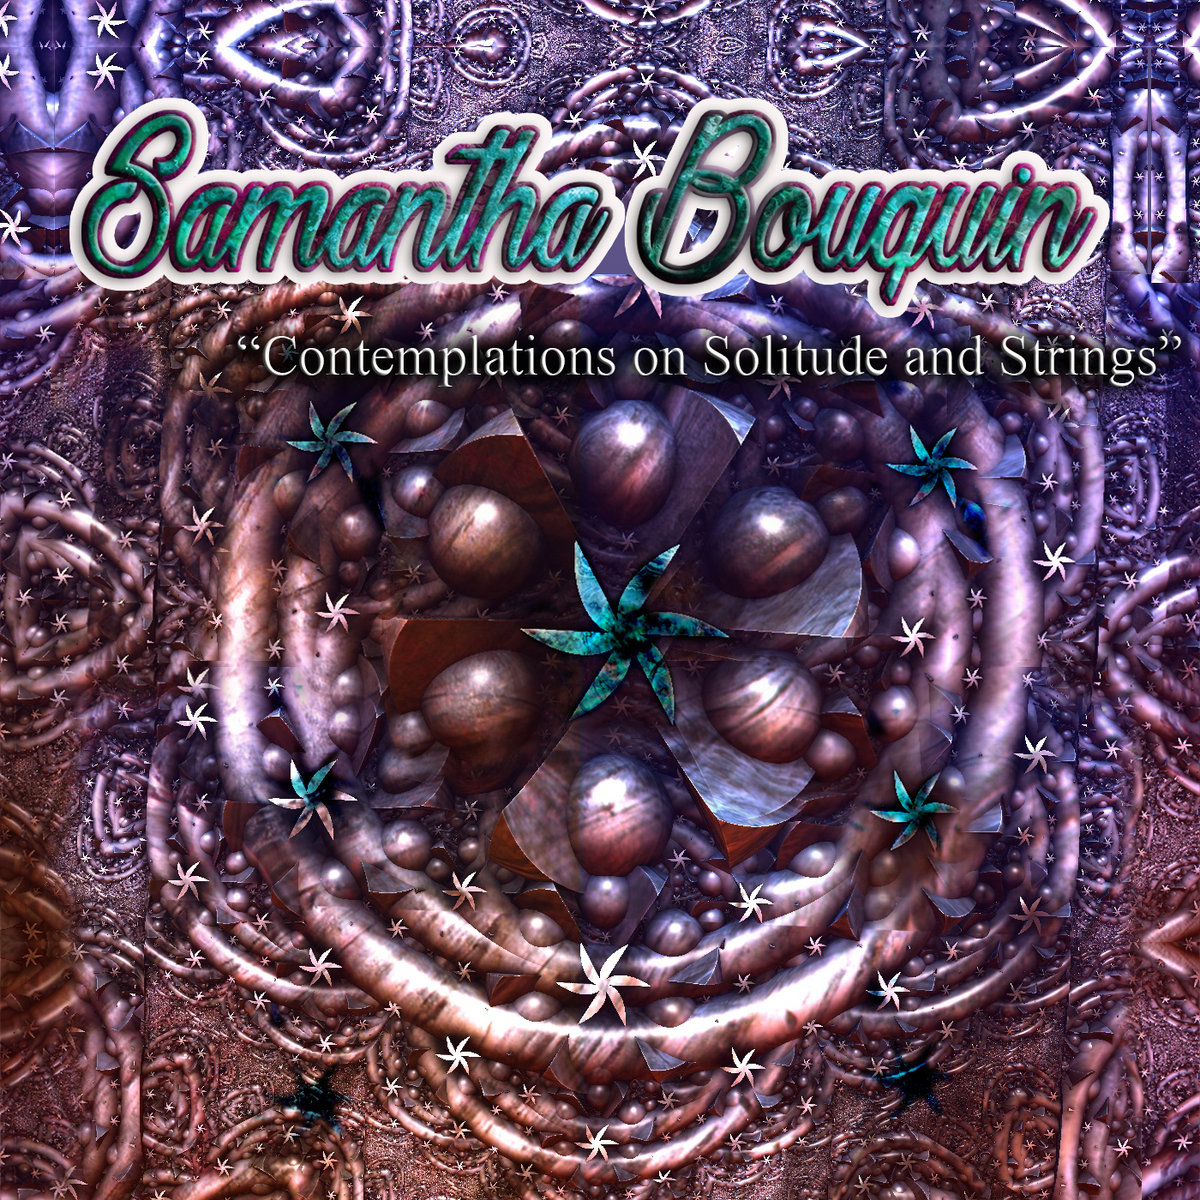  Samantha Bouquin – Contemplations On Solitude And Strings